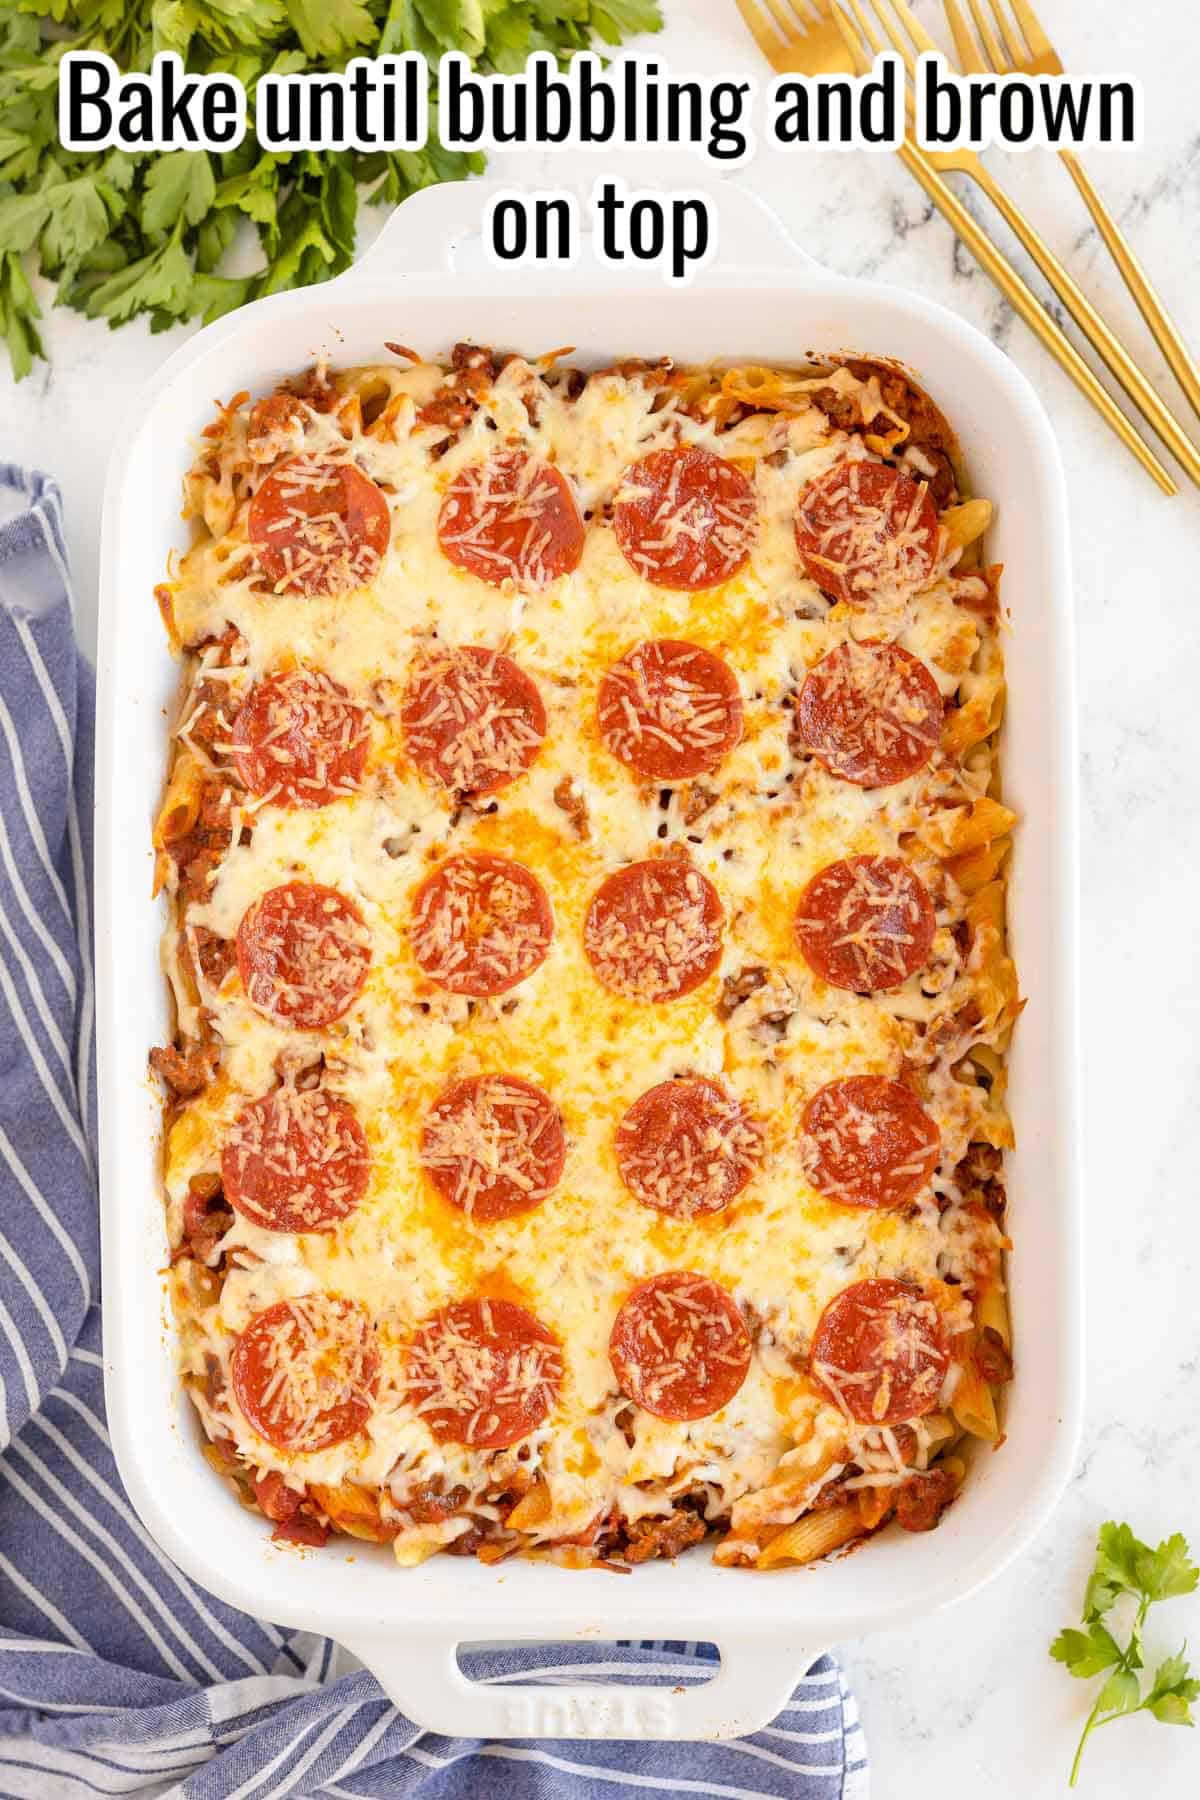 baked pizza casserole with instructions overlaid in text.